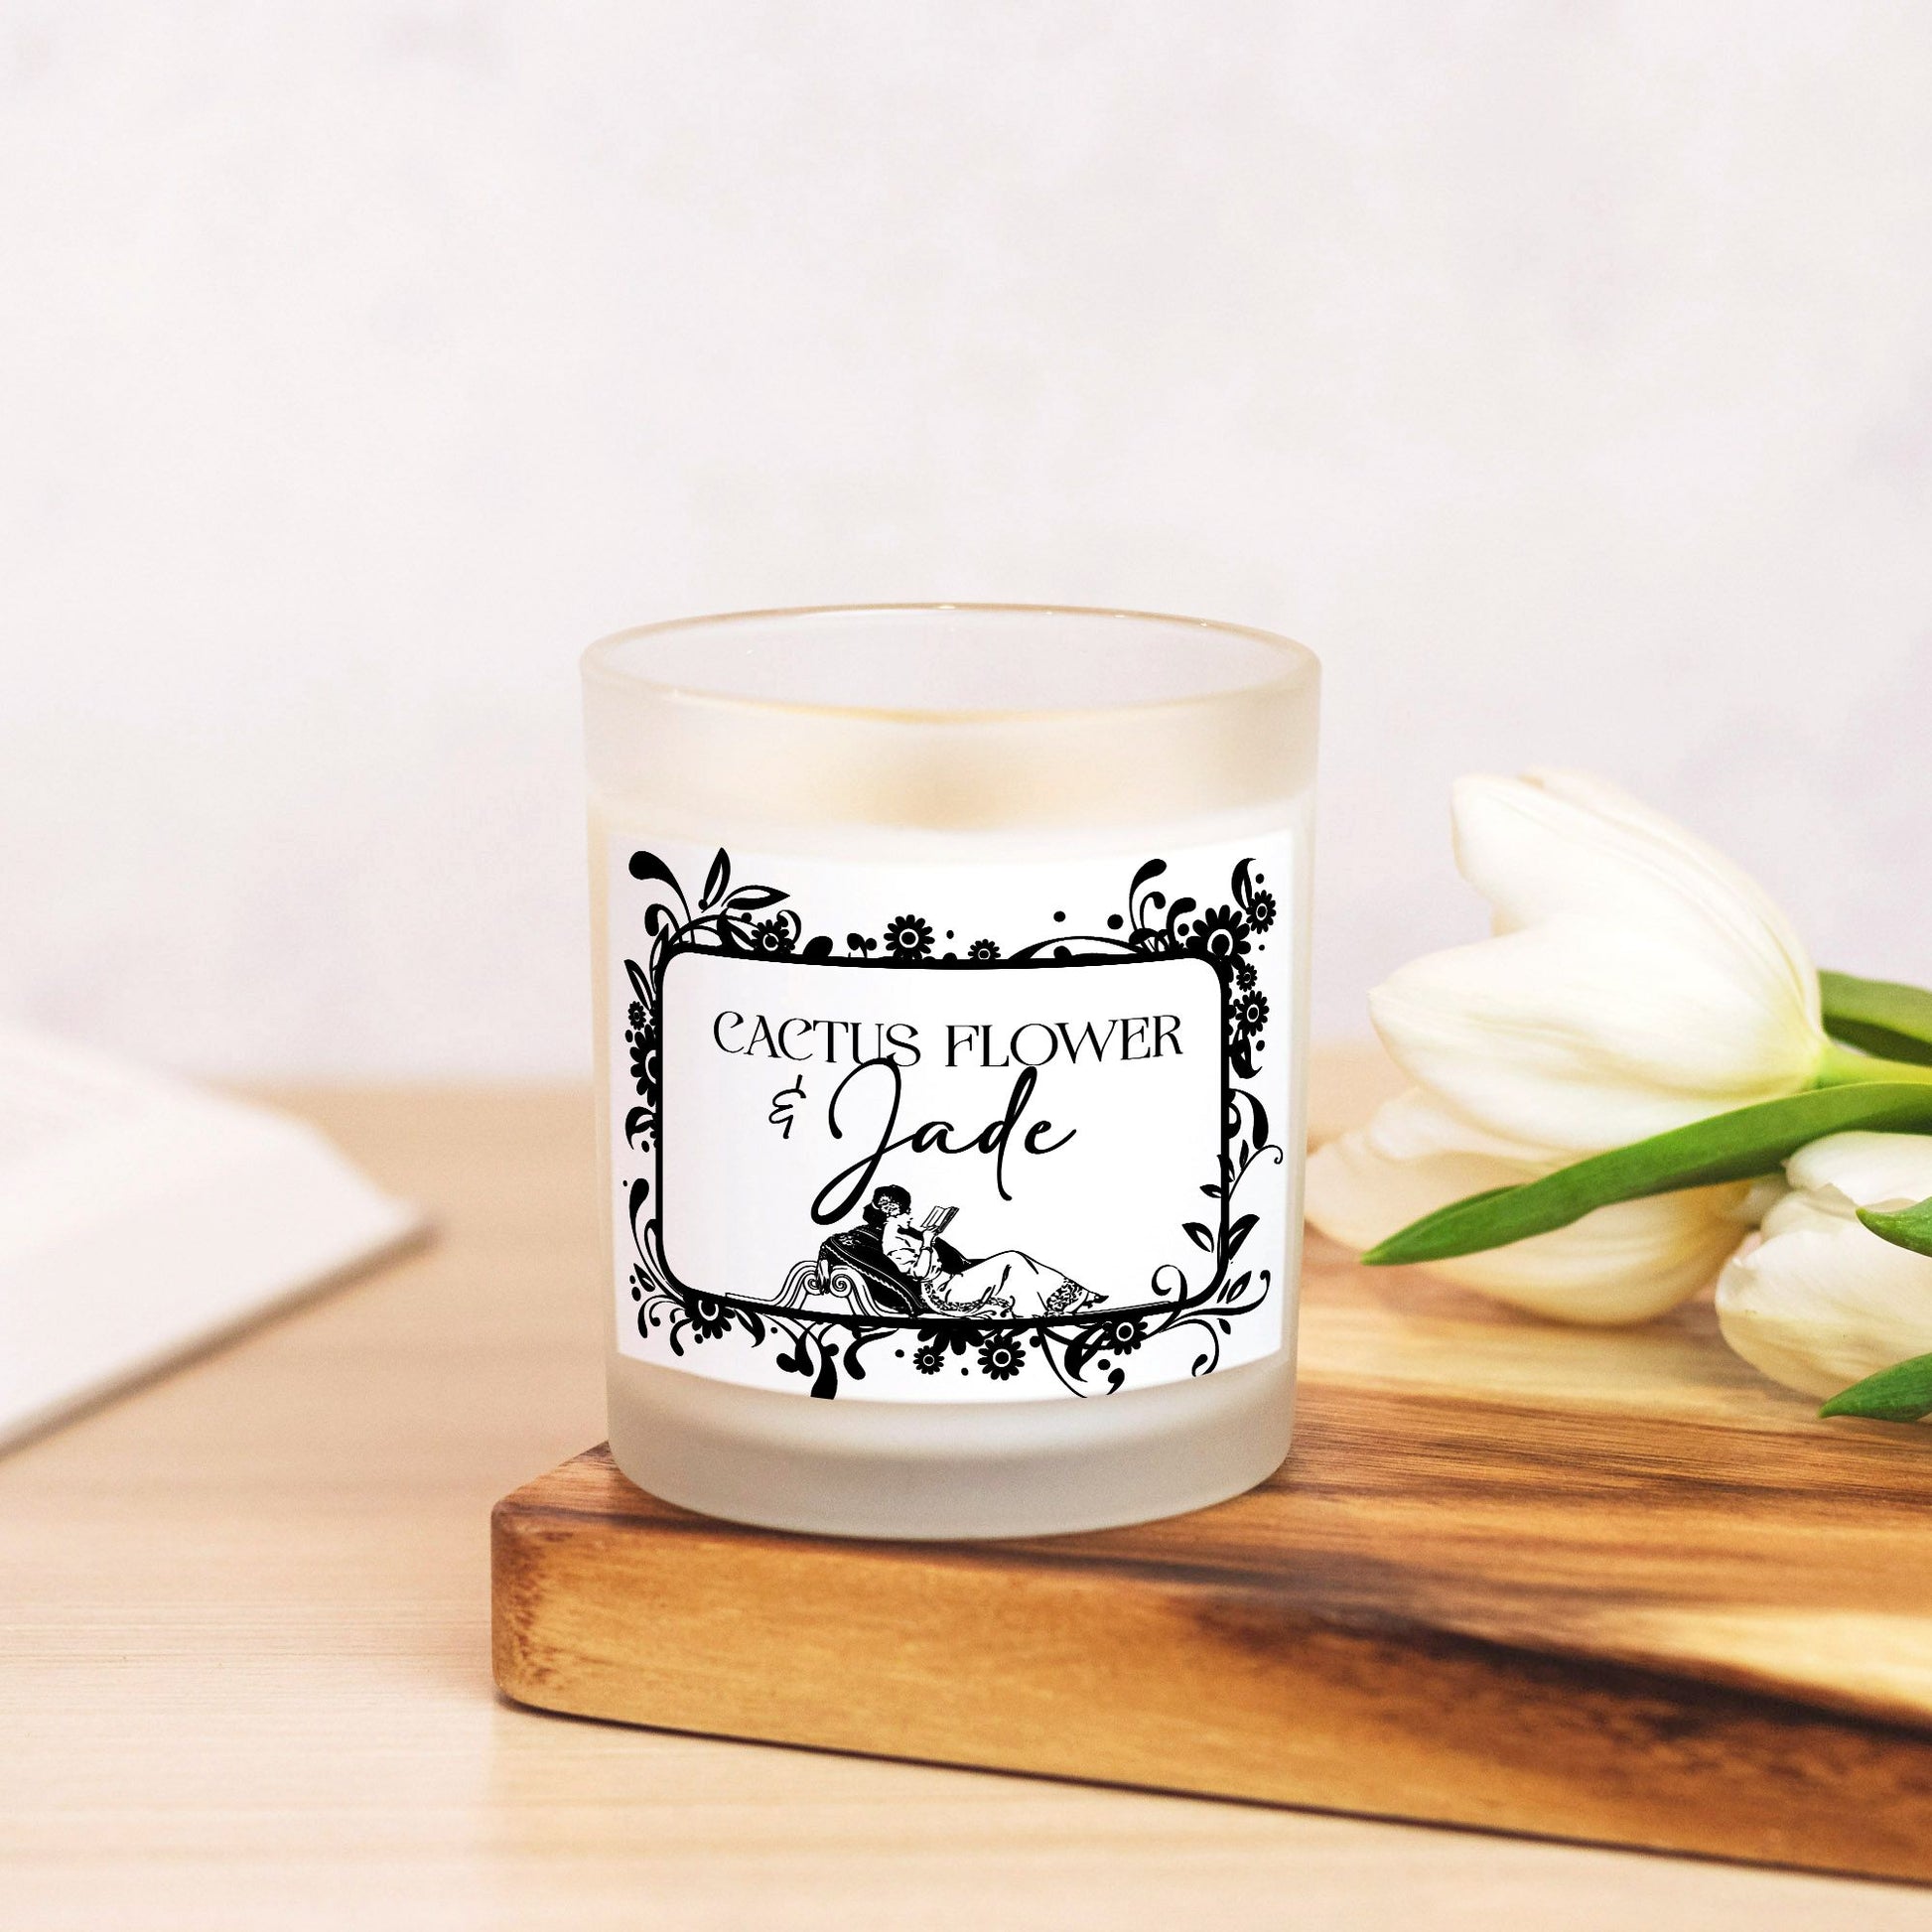 Cactus Flower &amp; Jade Candle Frosted Glass (Hand Poured 11 oz)